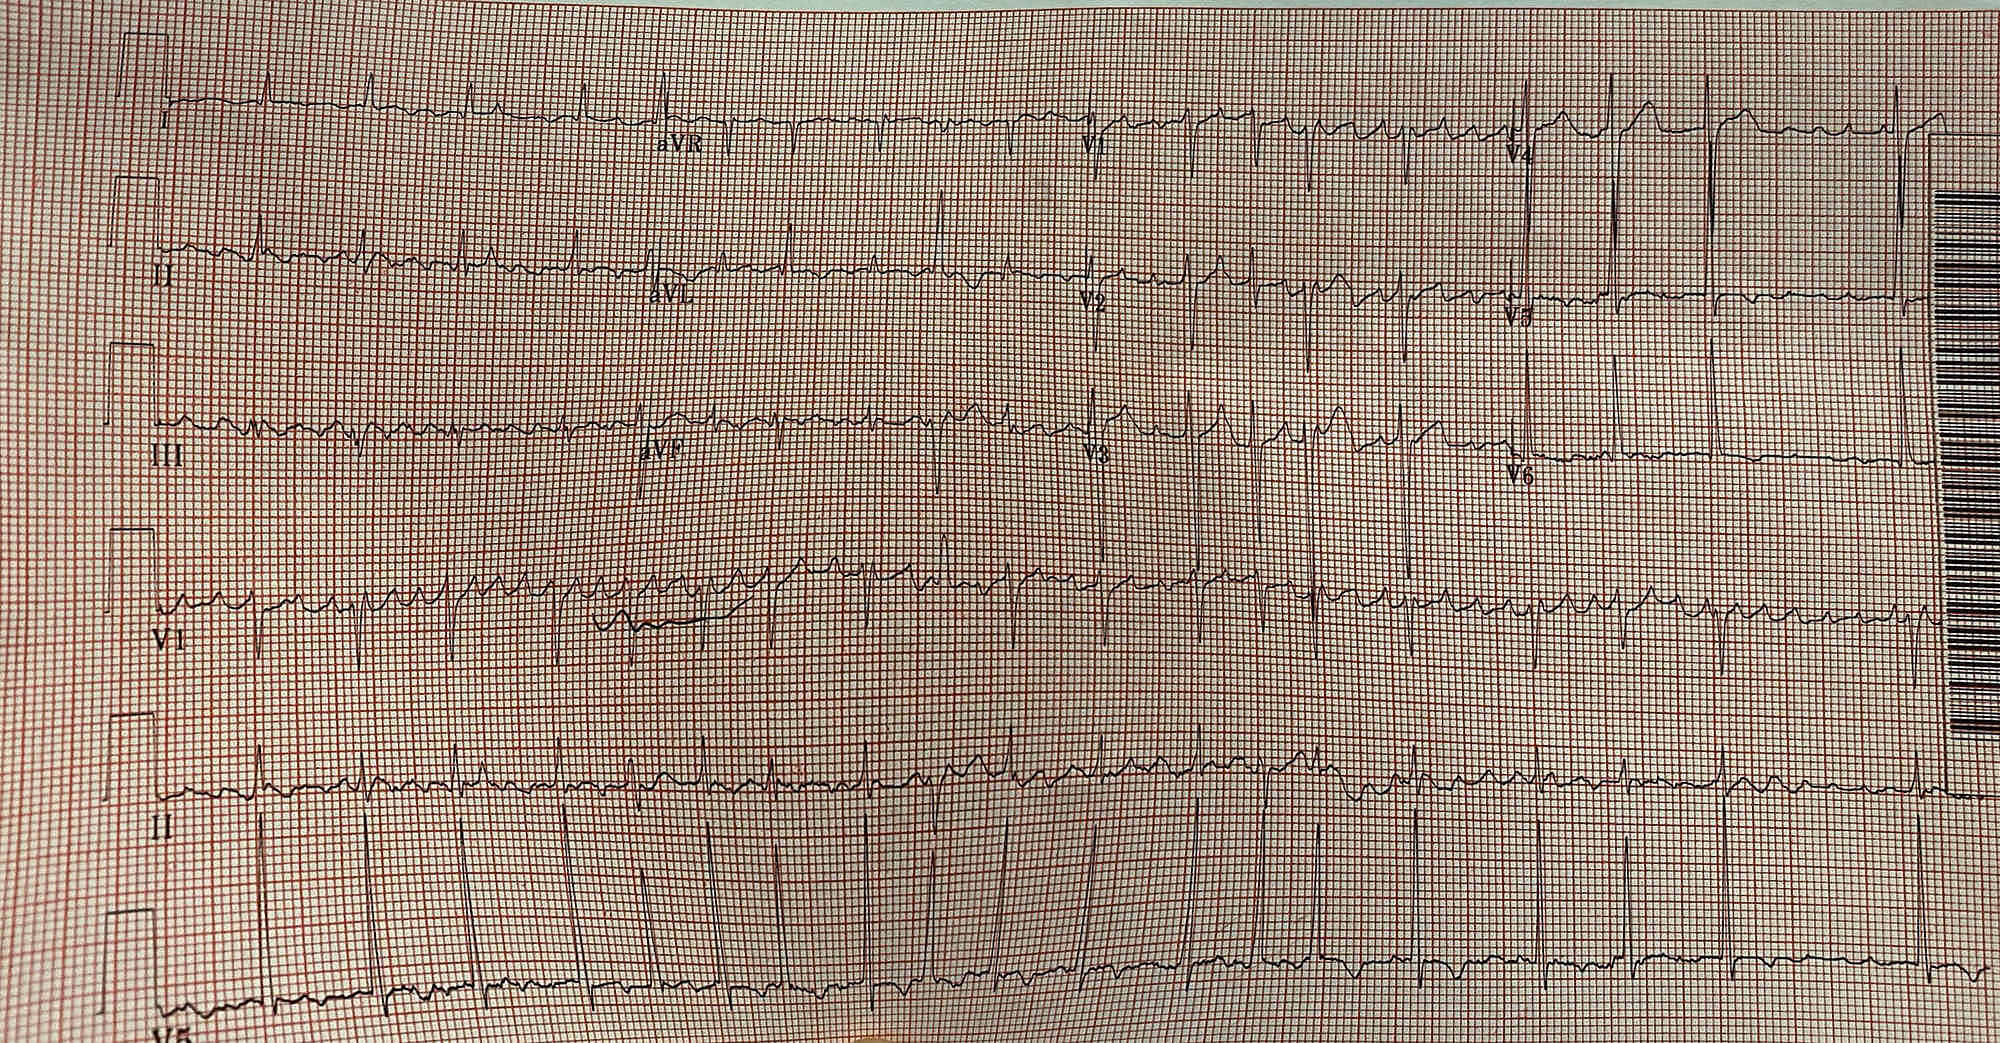 history of atrial flutter icd 10